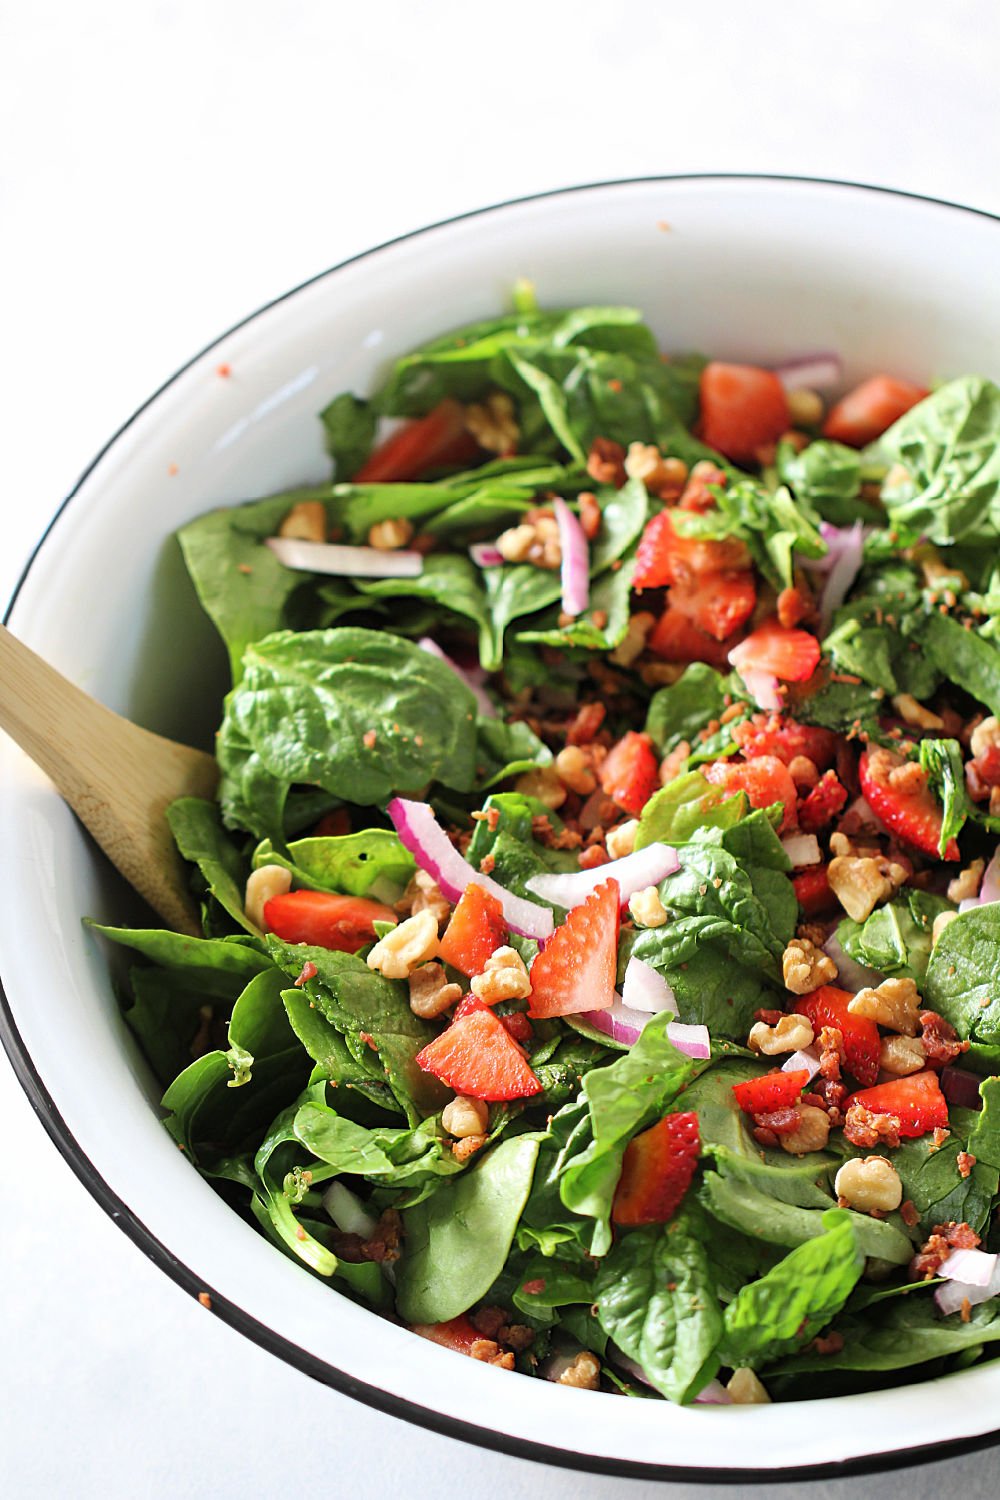 Strawberry Spinach Salad and Homemade Poppy Seed Dressing Recipe